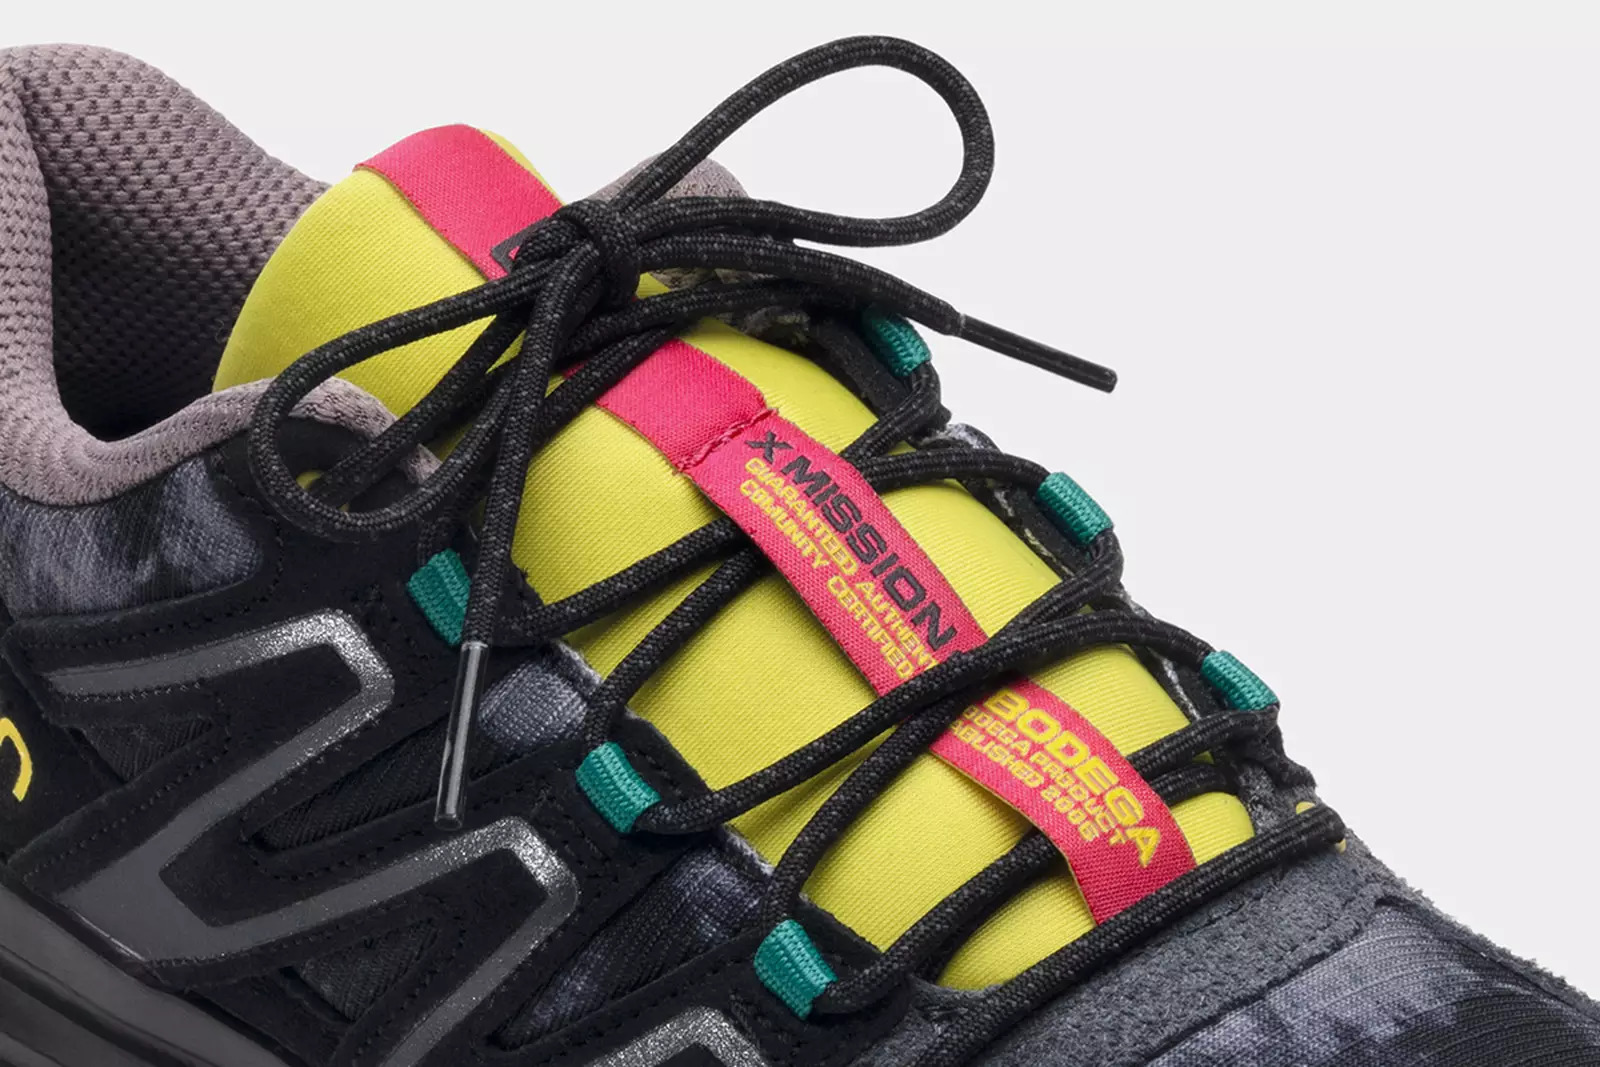 Bodega x Salomon X-Mission 4 Is Made For Exploring The Great Outdoors